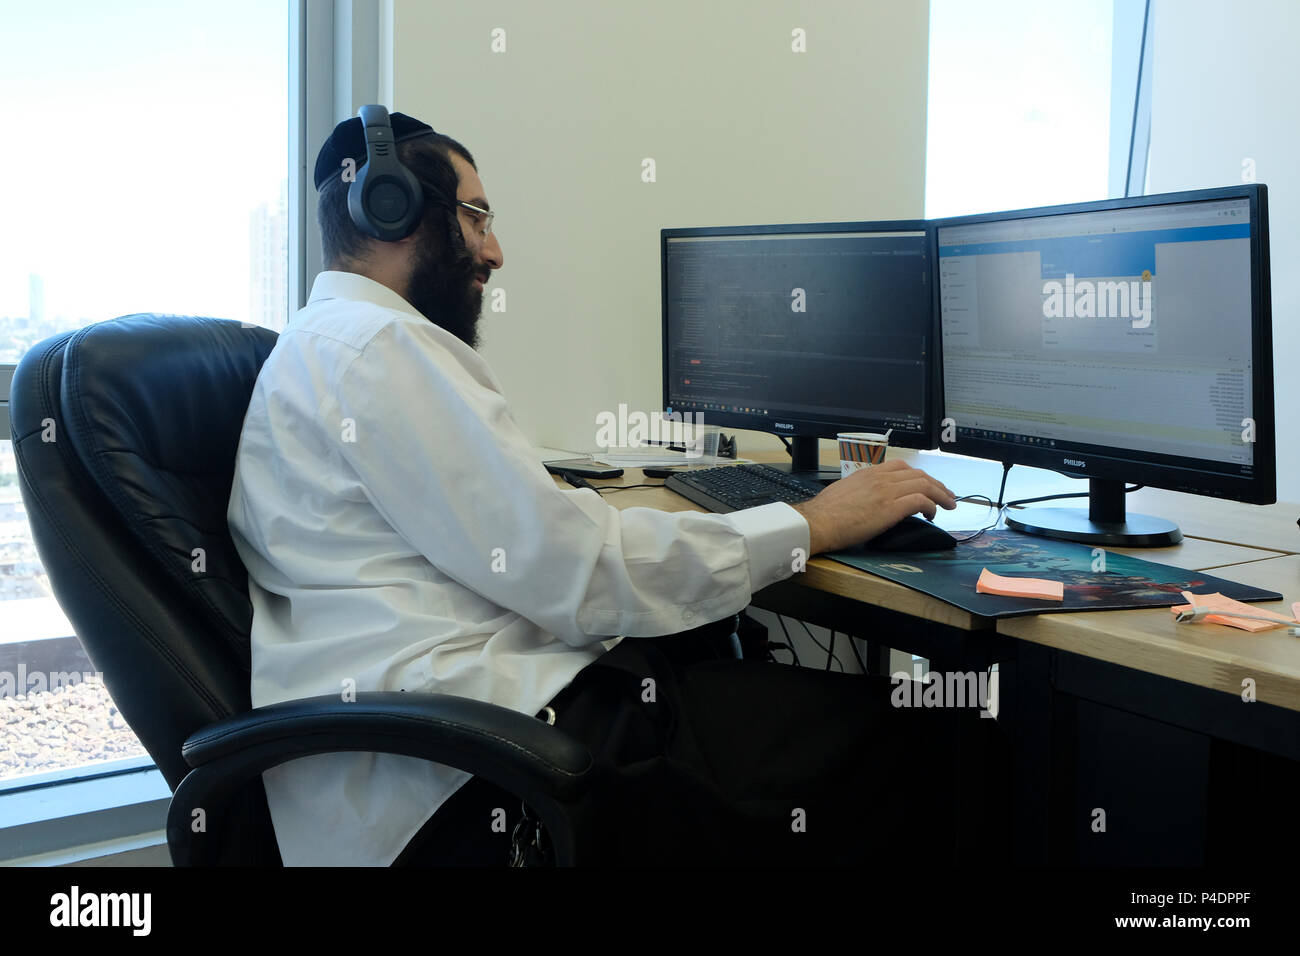 A Haredi Jew working on a computer at an Ultra-Orthodox Tech Incubator in the city of Bnei Brak or Bene Beraq a center of Haredi Judaism in Israel Stock Photo